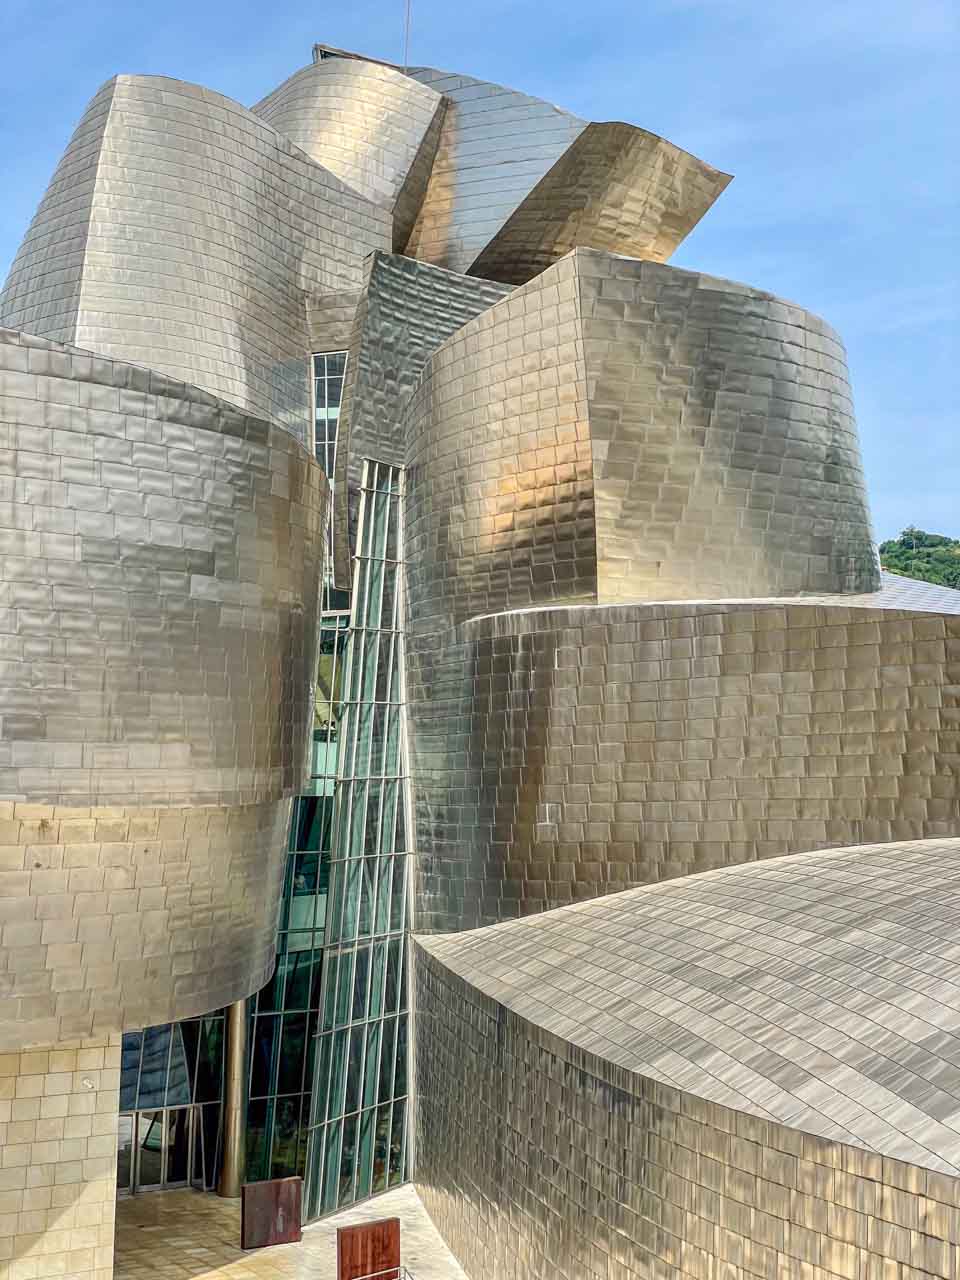 The silver-tiled and glass facade of the front of the Bilbao Guggenheim Museum.